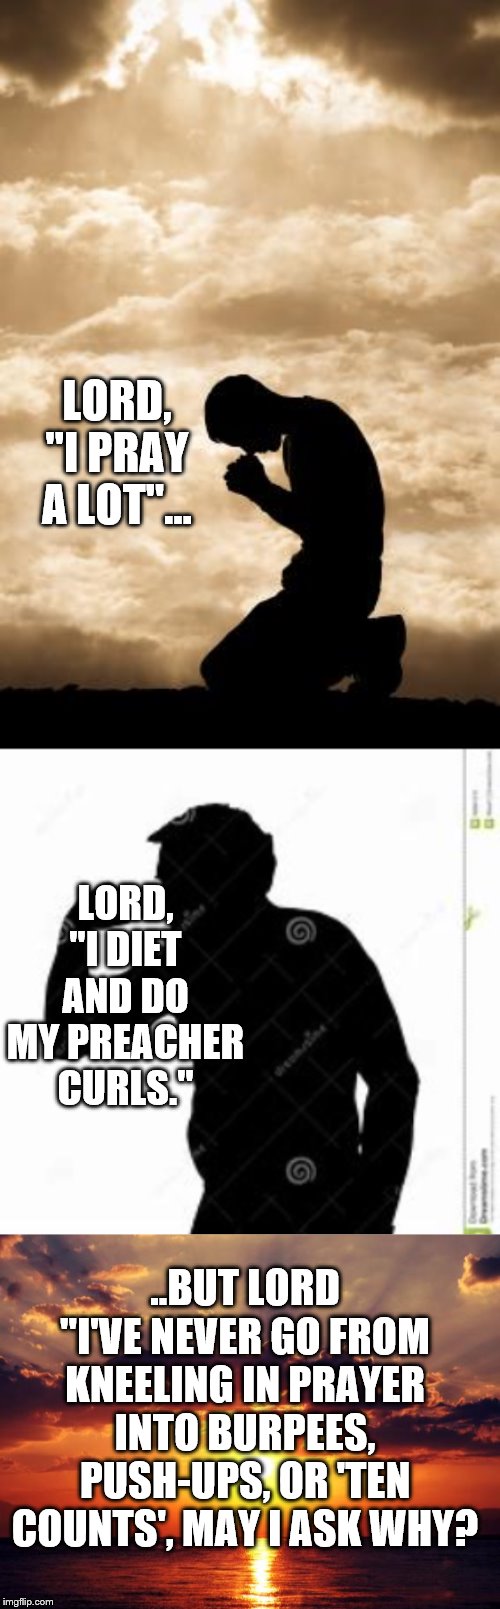 LORD, "I PRAY A LOT"... LORD, "I DIET AND DO MY PREACHER CURLS."; ..BUT LORD "I'VE NEVER GO FROM KNEELING IN PRAYER INTO BURPEES, PUSH-UPS, OR 'TEN COUNTS', MAY I ASK WHY? | image tagged in sunset,morning prayer,gymlife | made w/ Imgflip meme maker